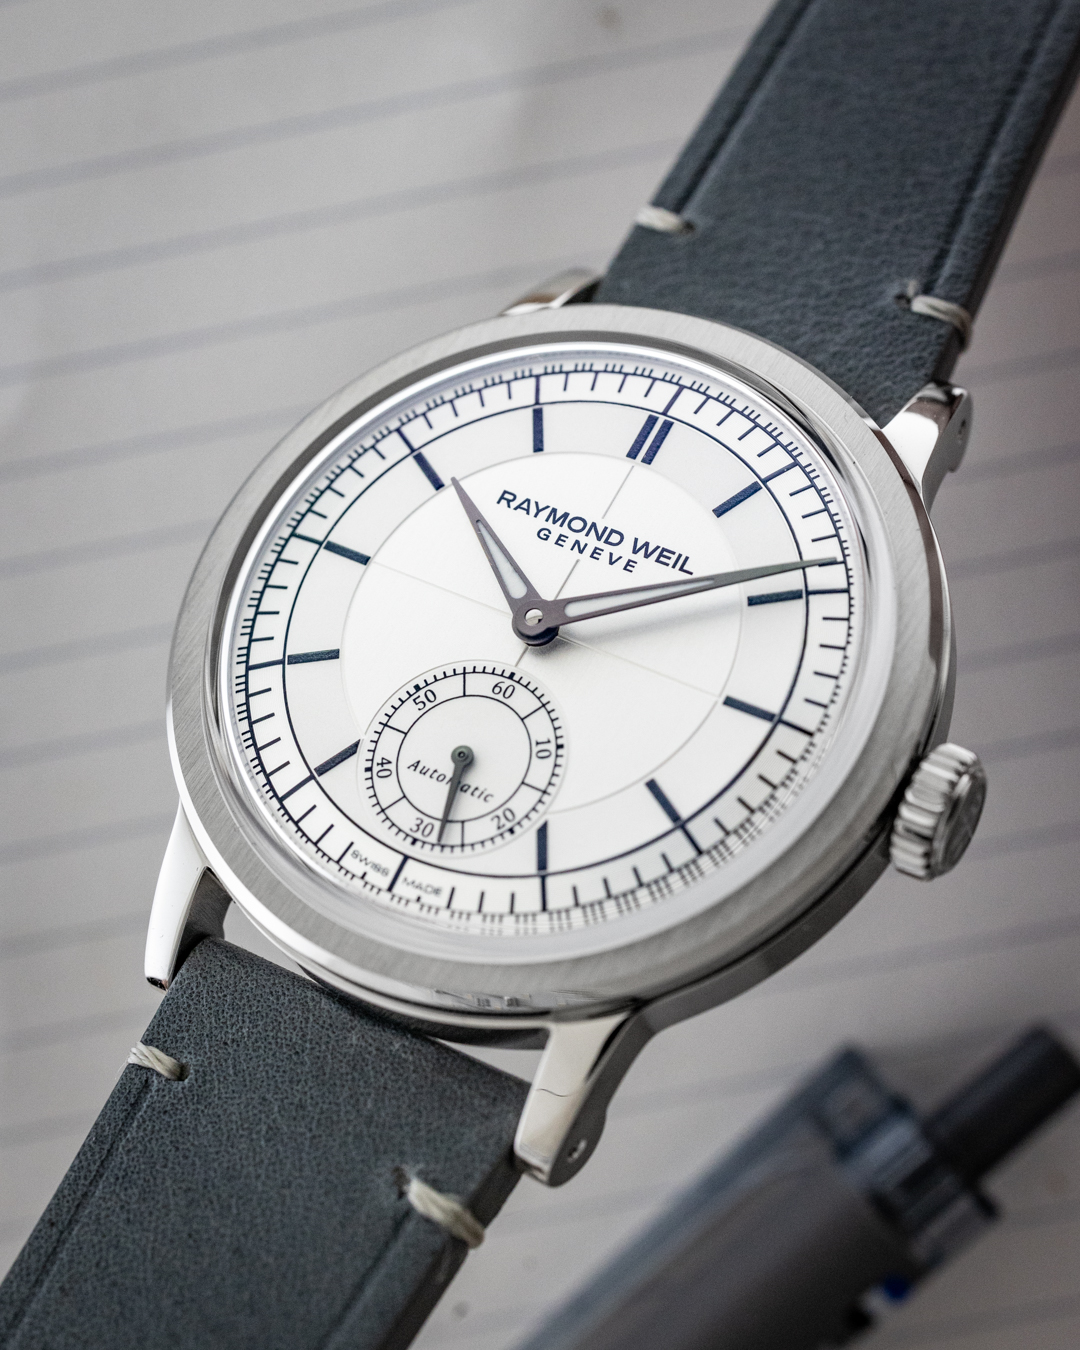 RAYMOND WEIL MILLESIME SMALL SECONDS 2